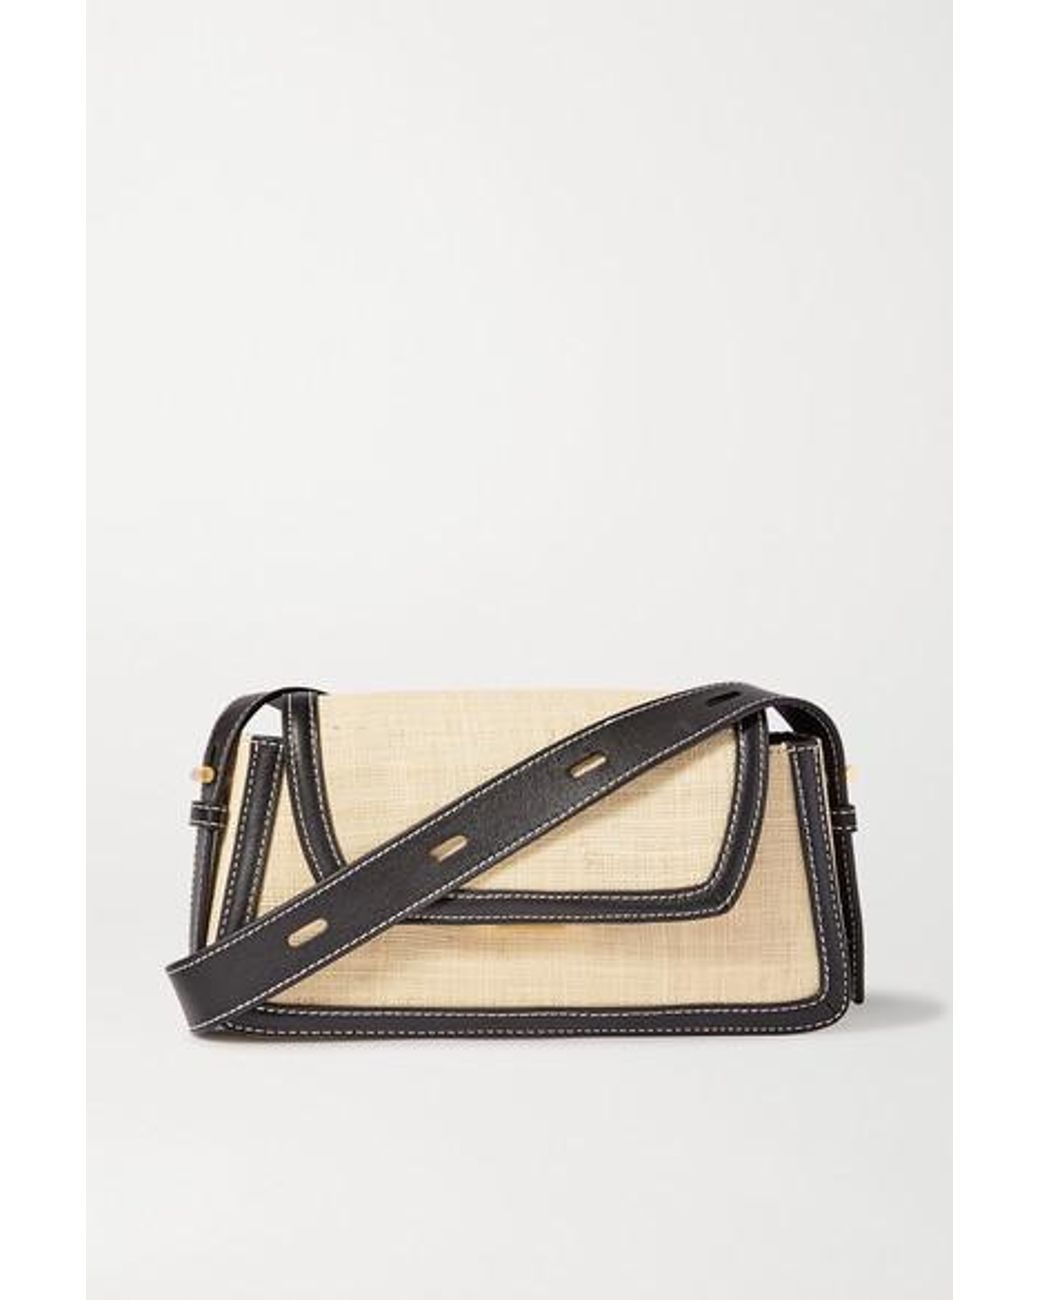 Oroton Camille Two-tone Straw And Leather Shoulder Bag in Black